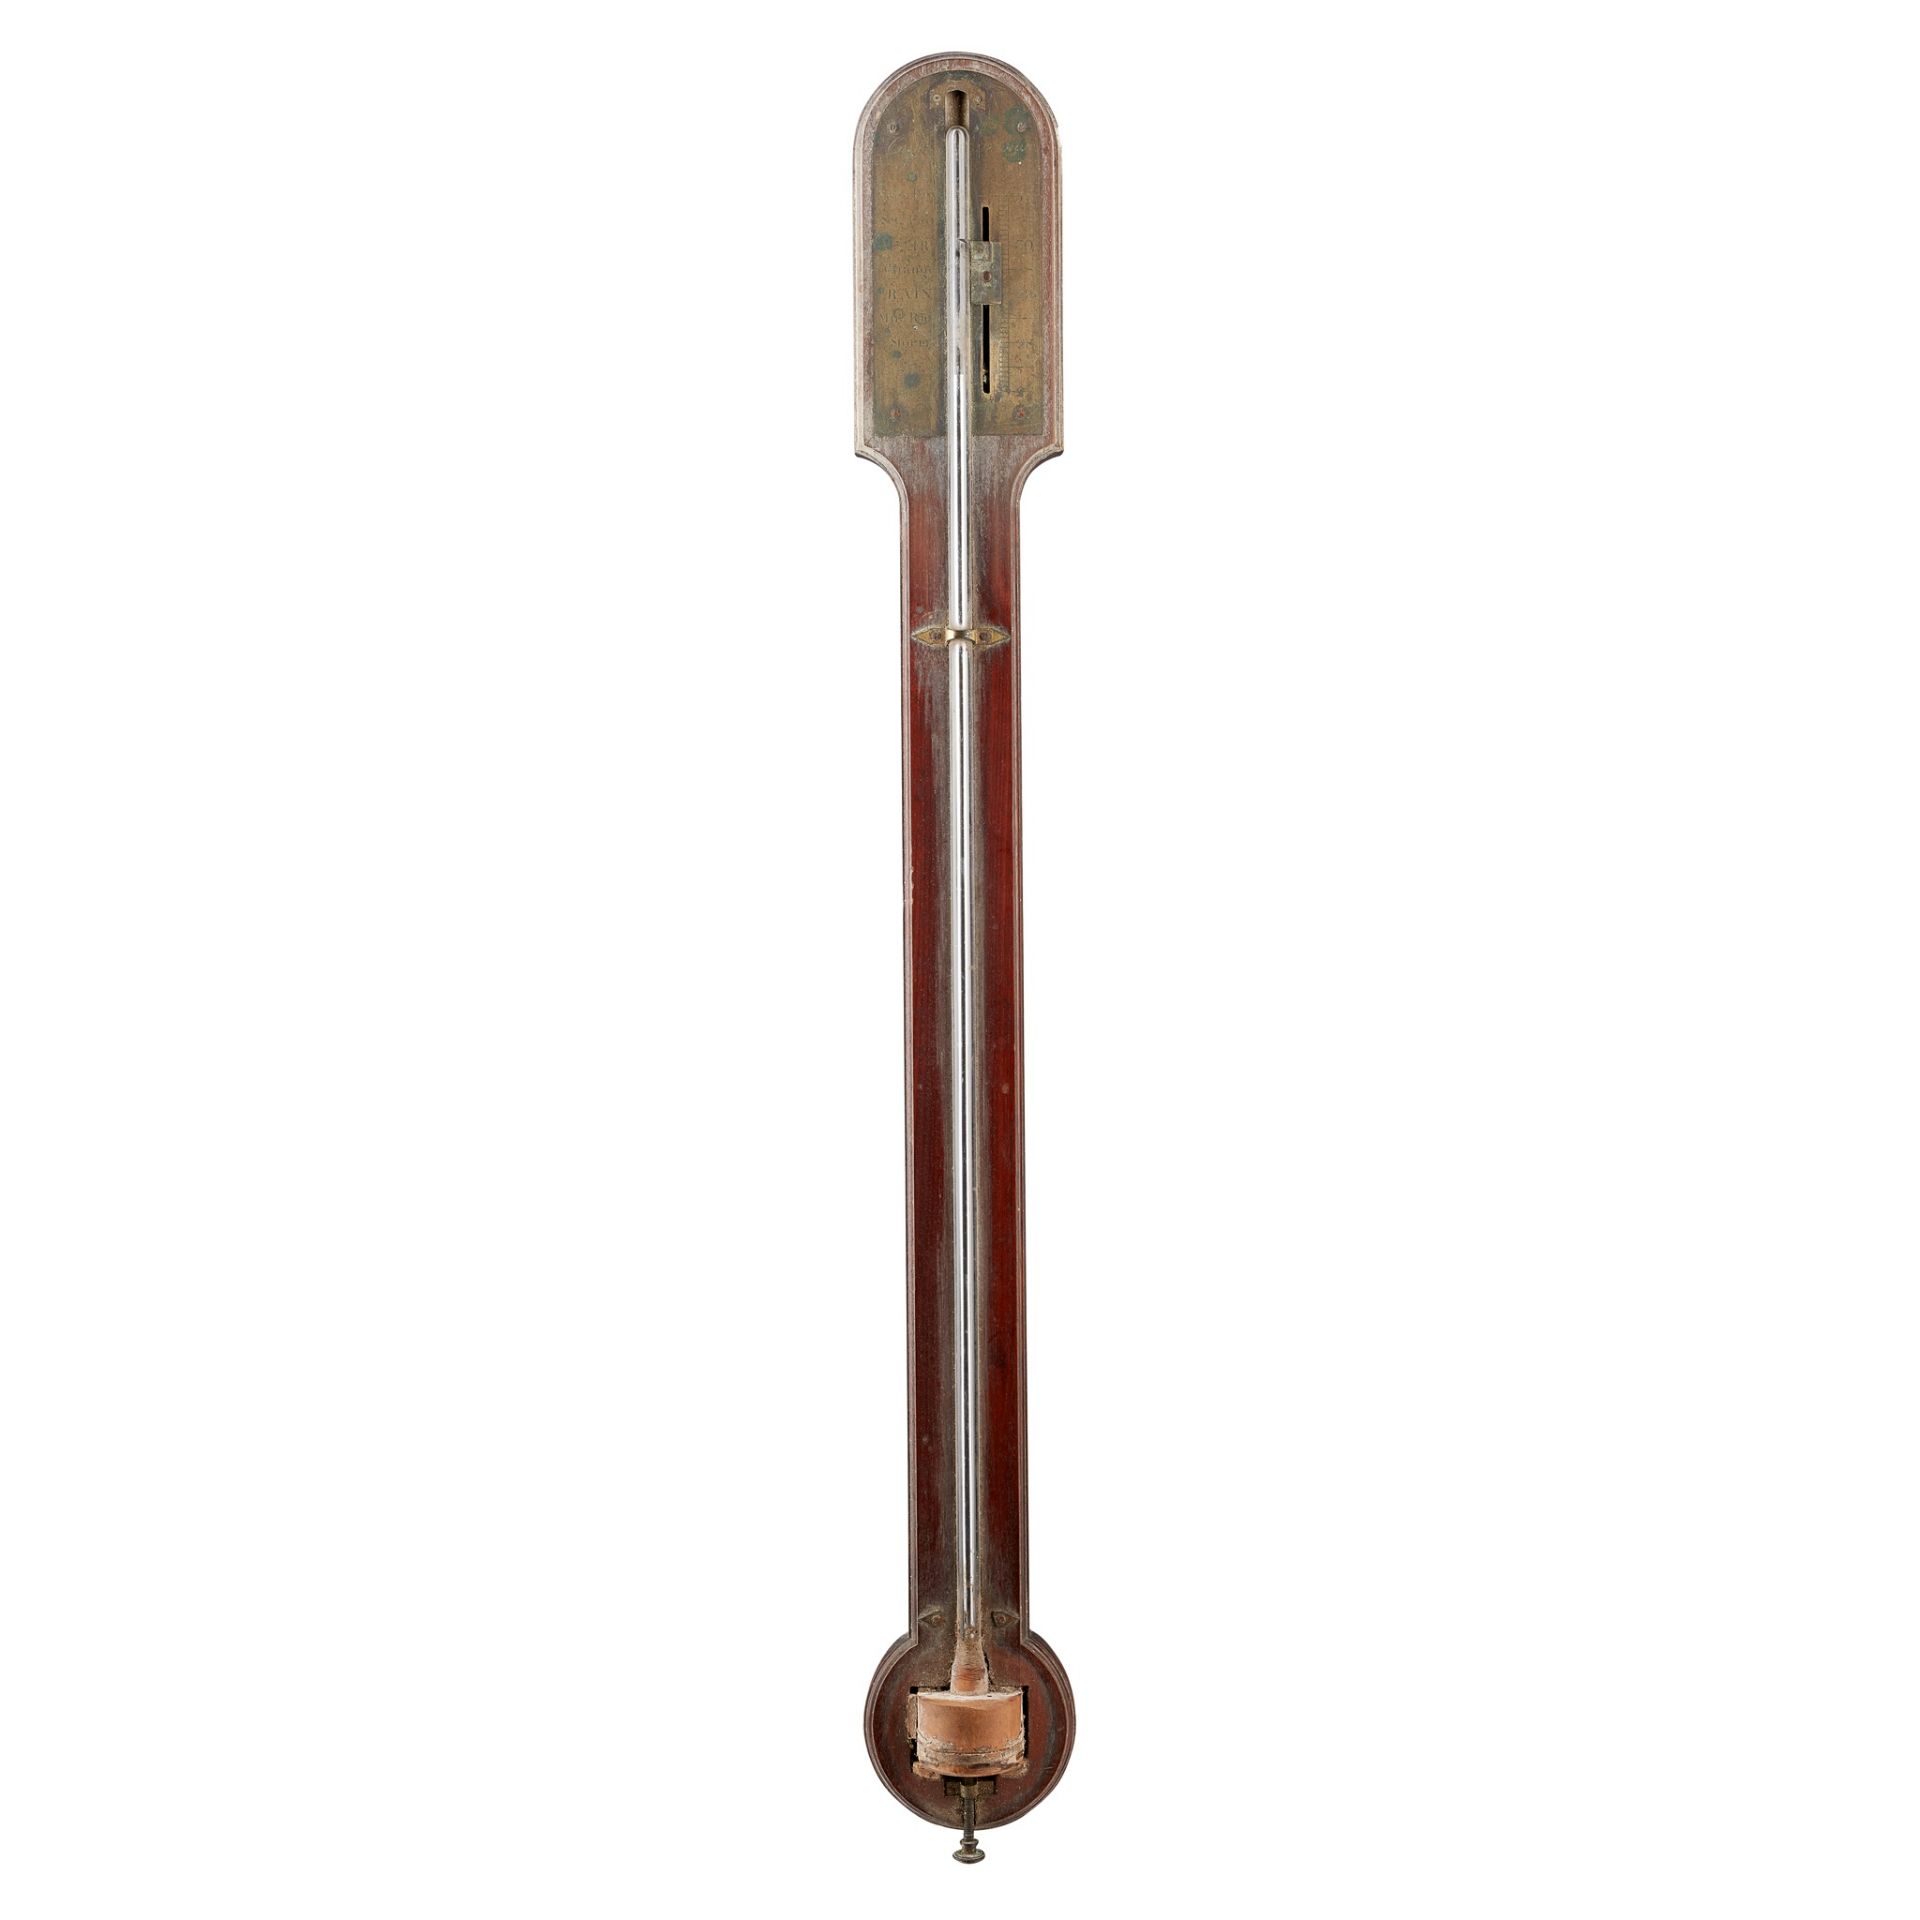 GEORGE III MAHOGANY STICK BAROMETER, BY WILLIAM CARY, LONDON LATE 18TH/ EARLY 19TH CENTURY